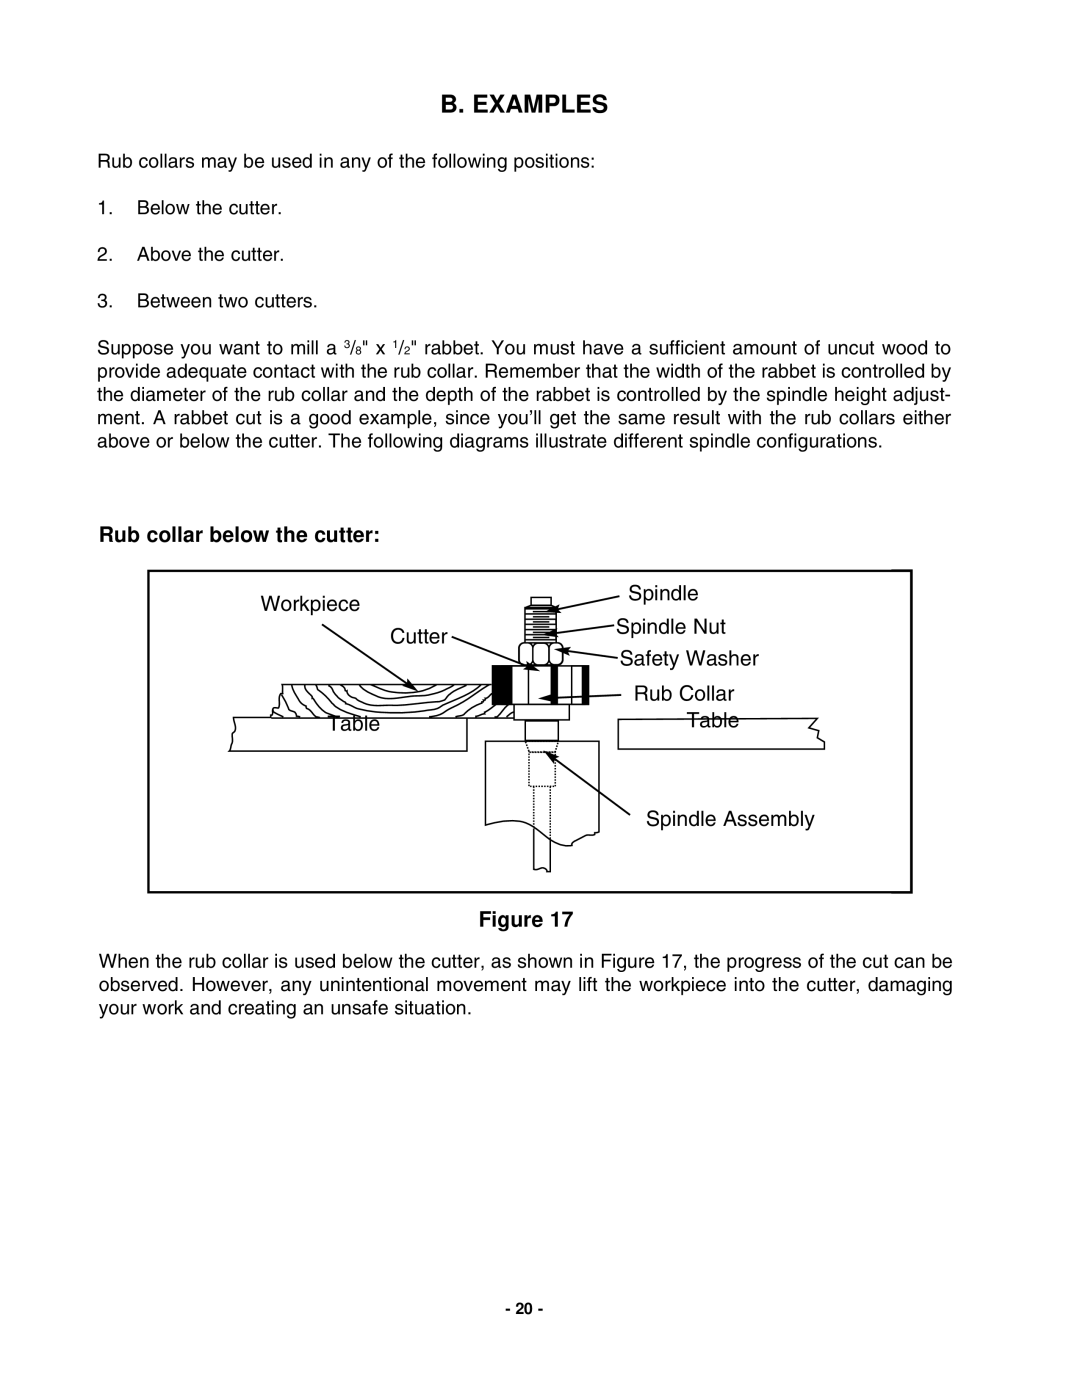 Grizzly G1024 instruction manual B. Examples, Rub collar below the cutter 